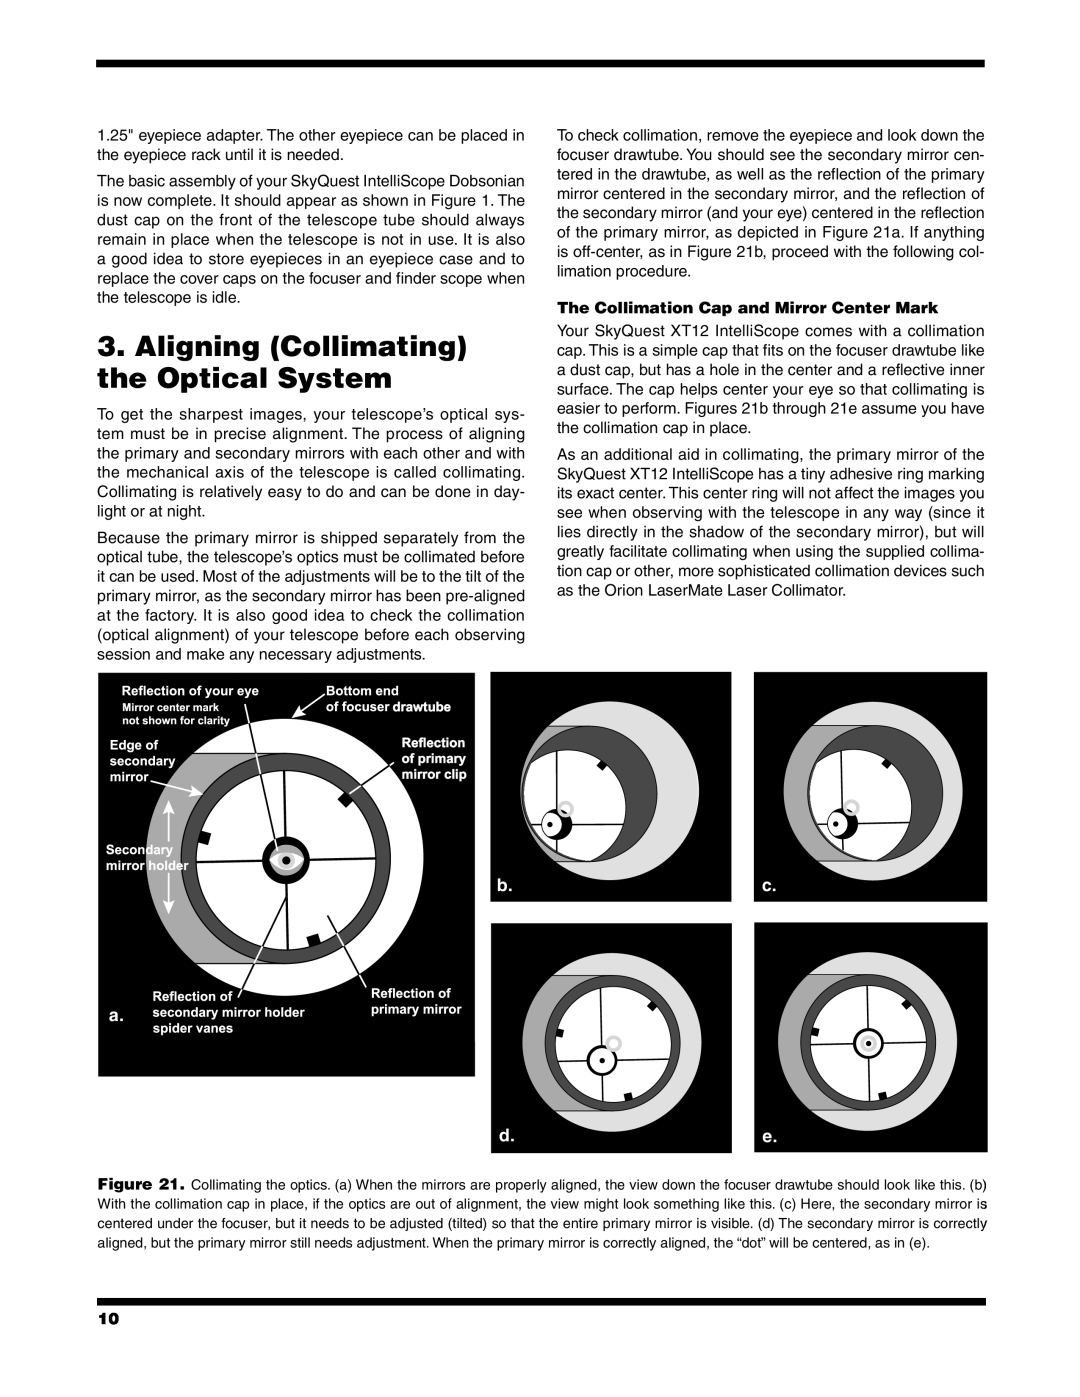 Orion XT12 instruction manual Aligning Collimating the Optical System, The Collimation Cap and Mirror Center Mark 